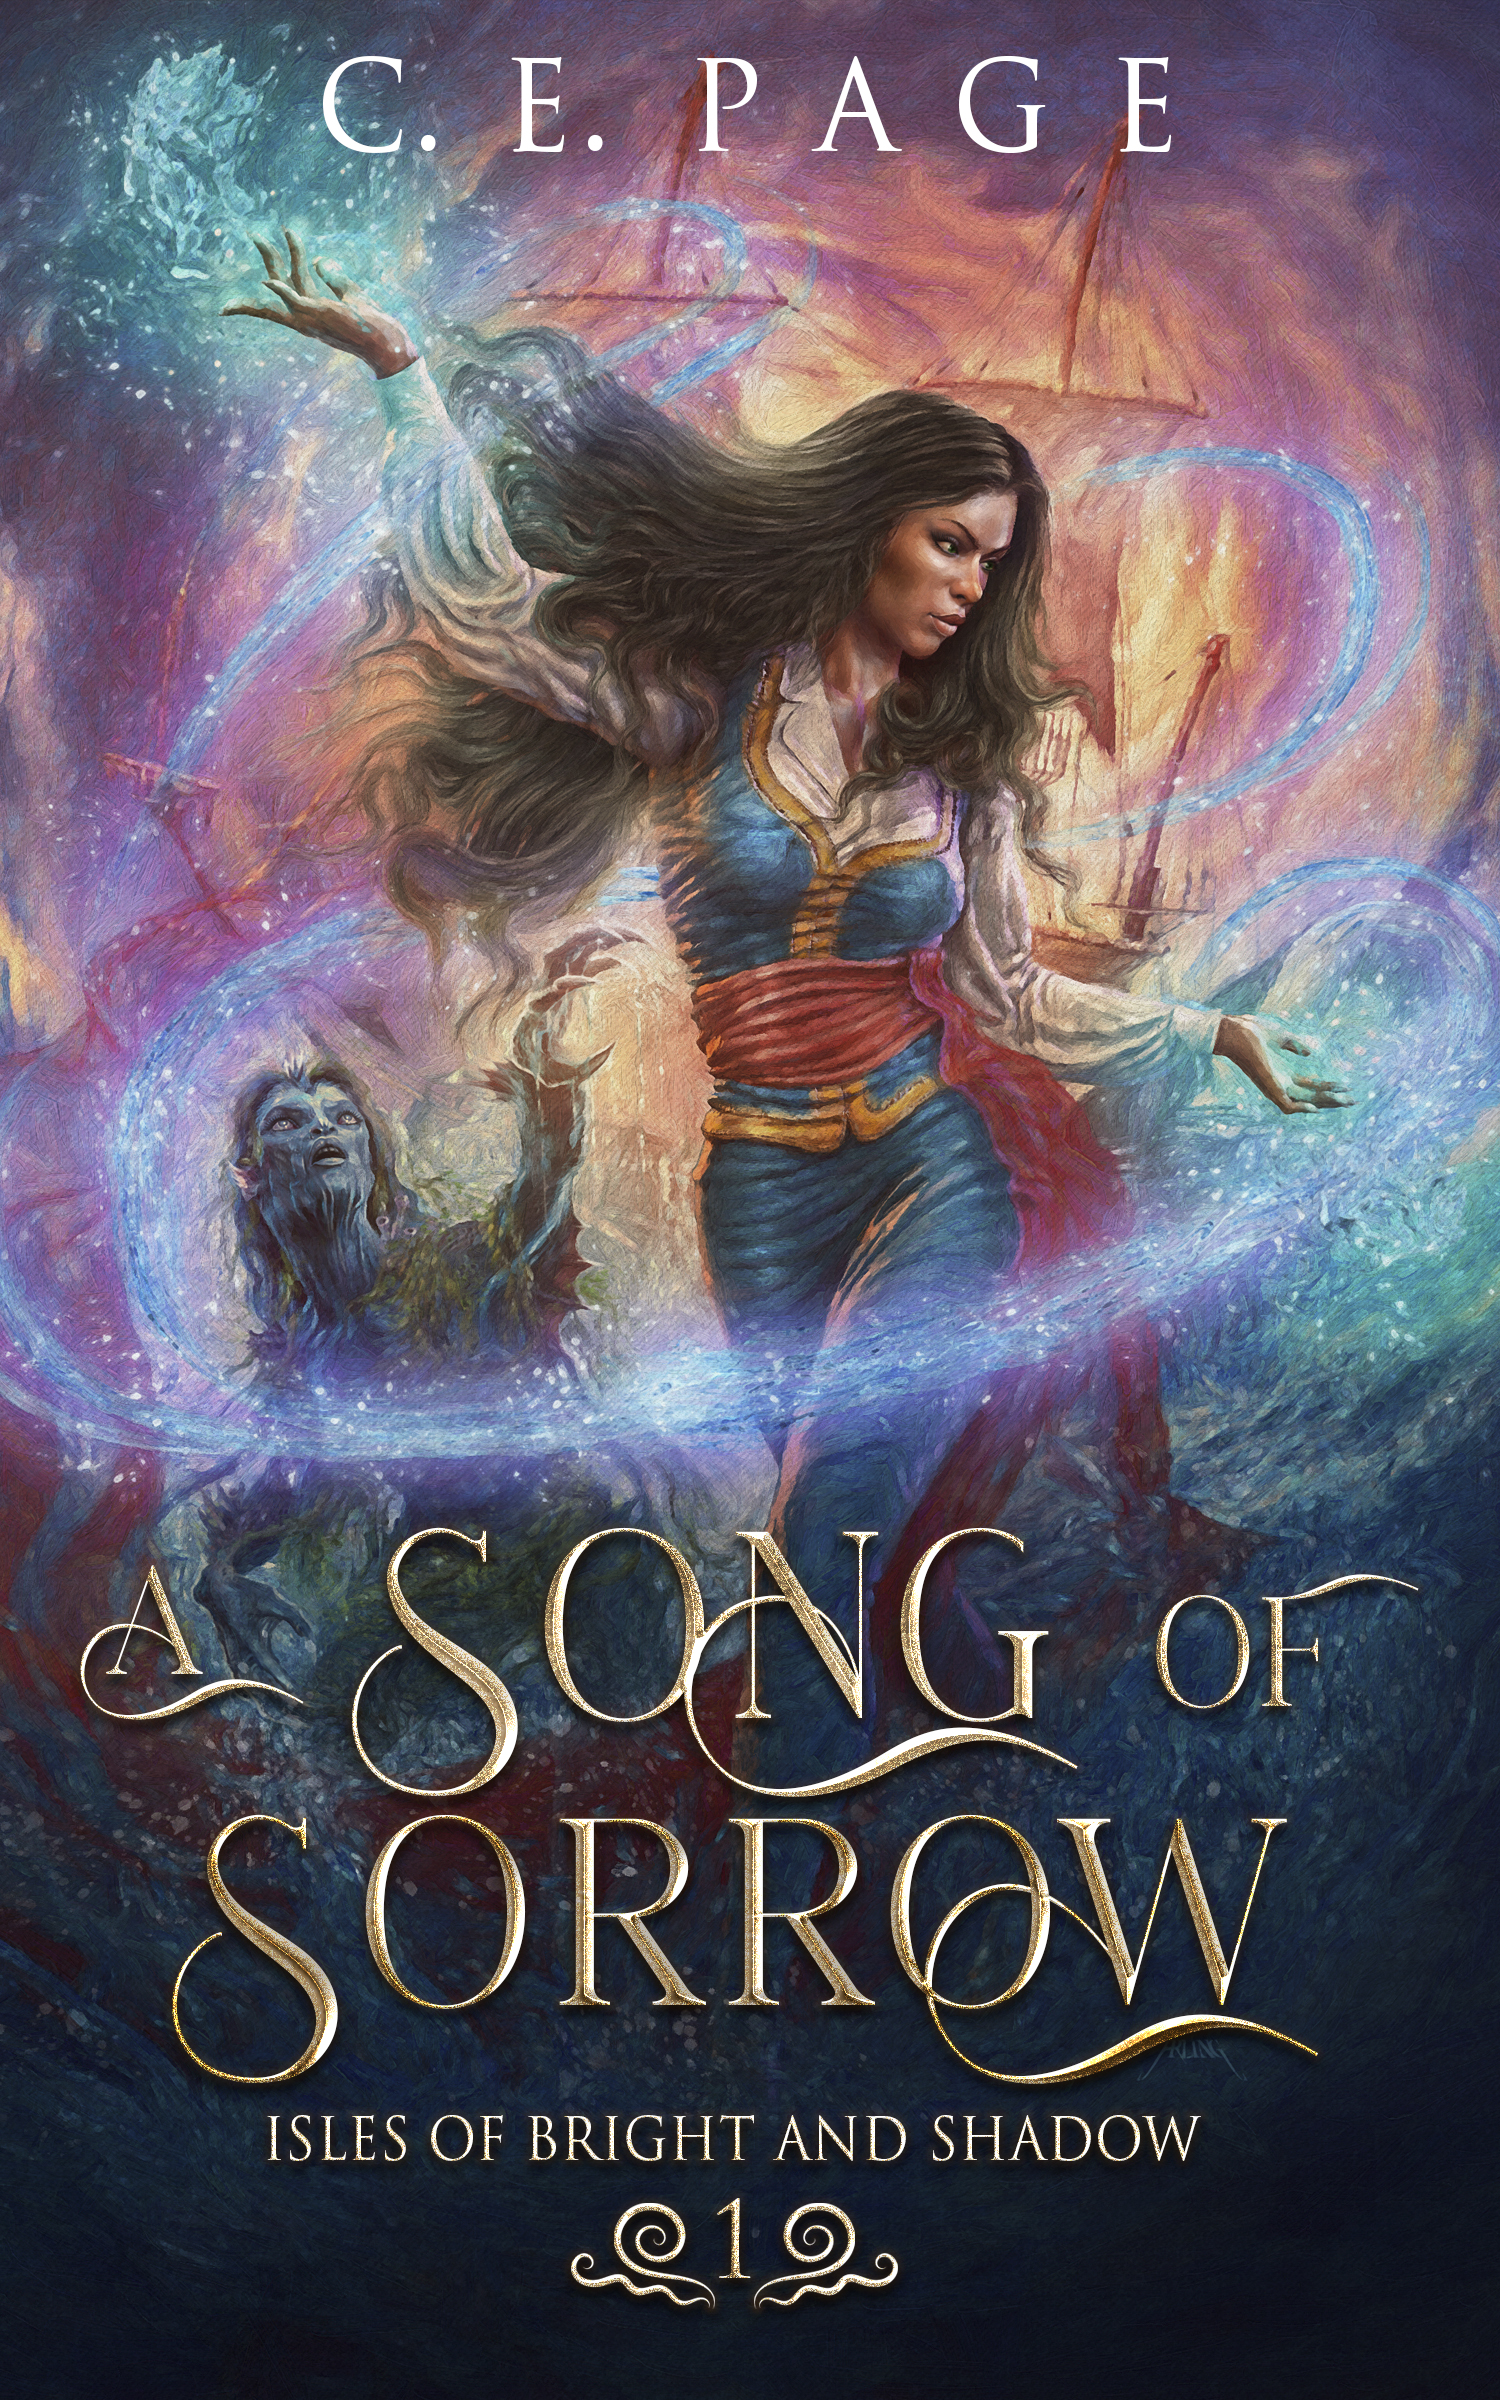 Cassandra_Page_A_Song_of_Sorrow_ebook - Copy